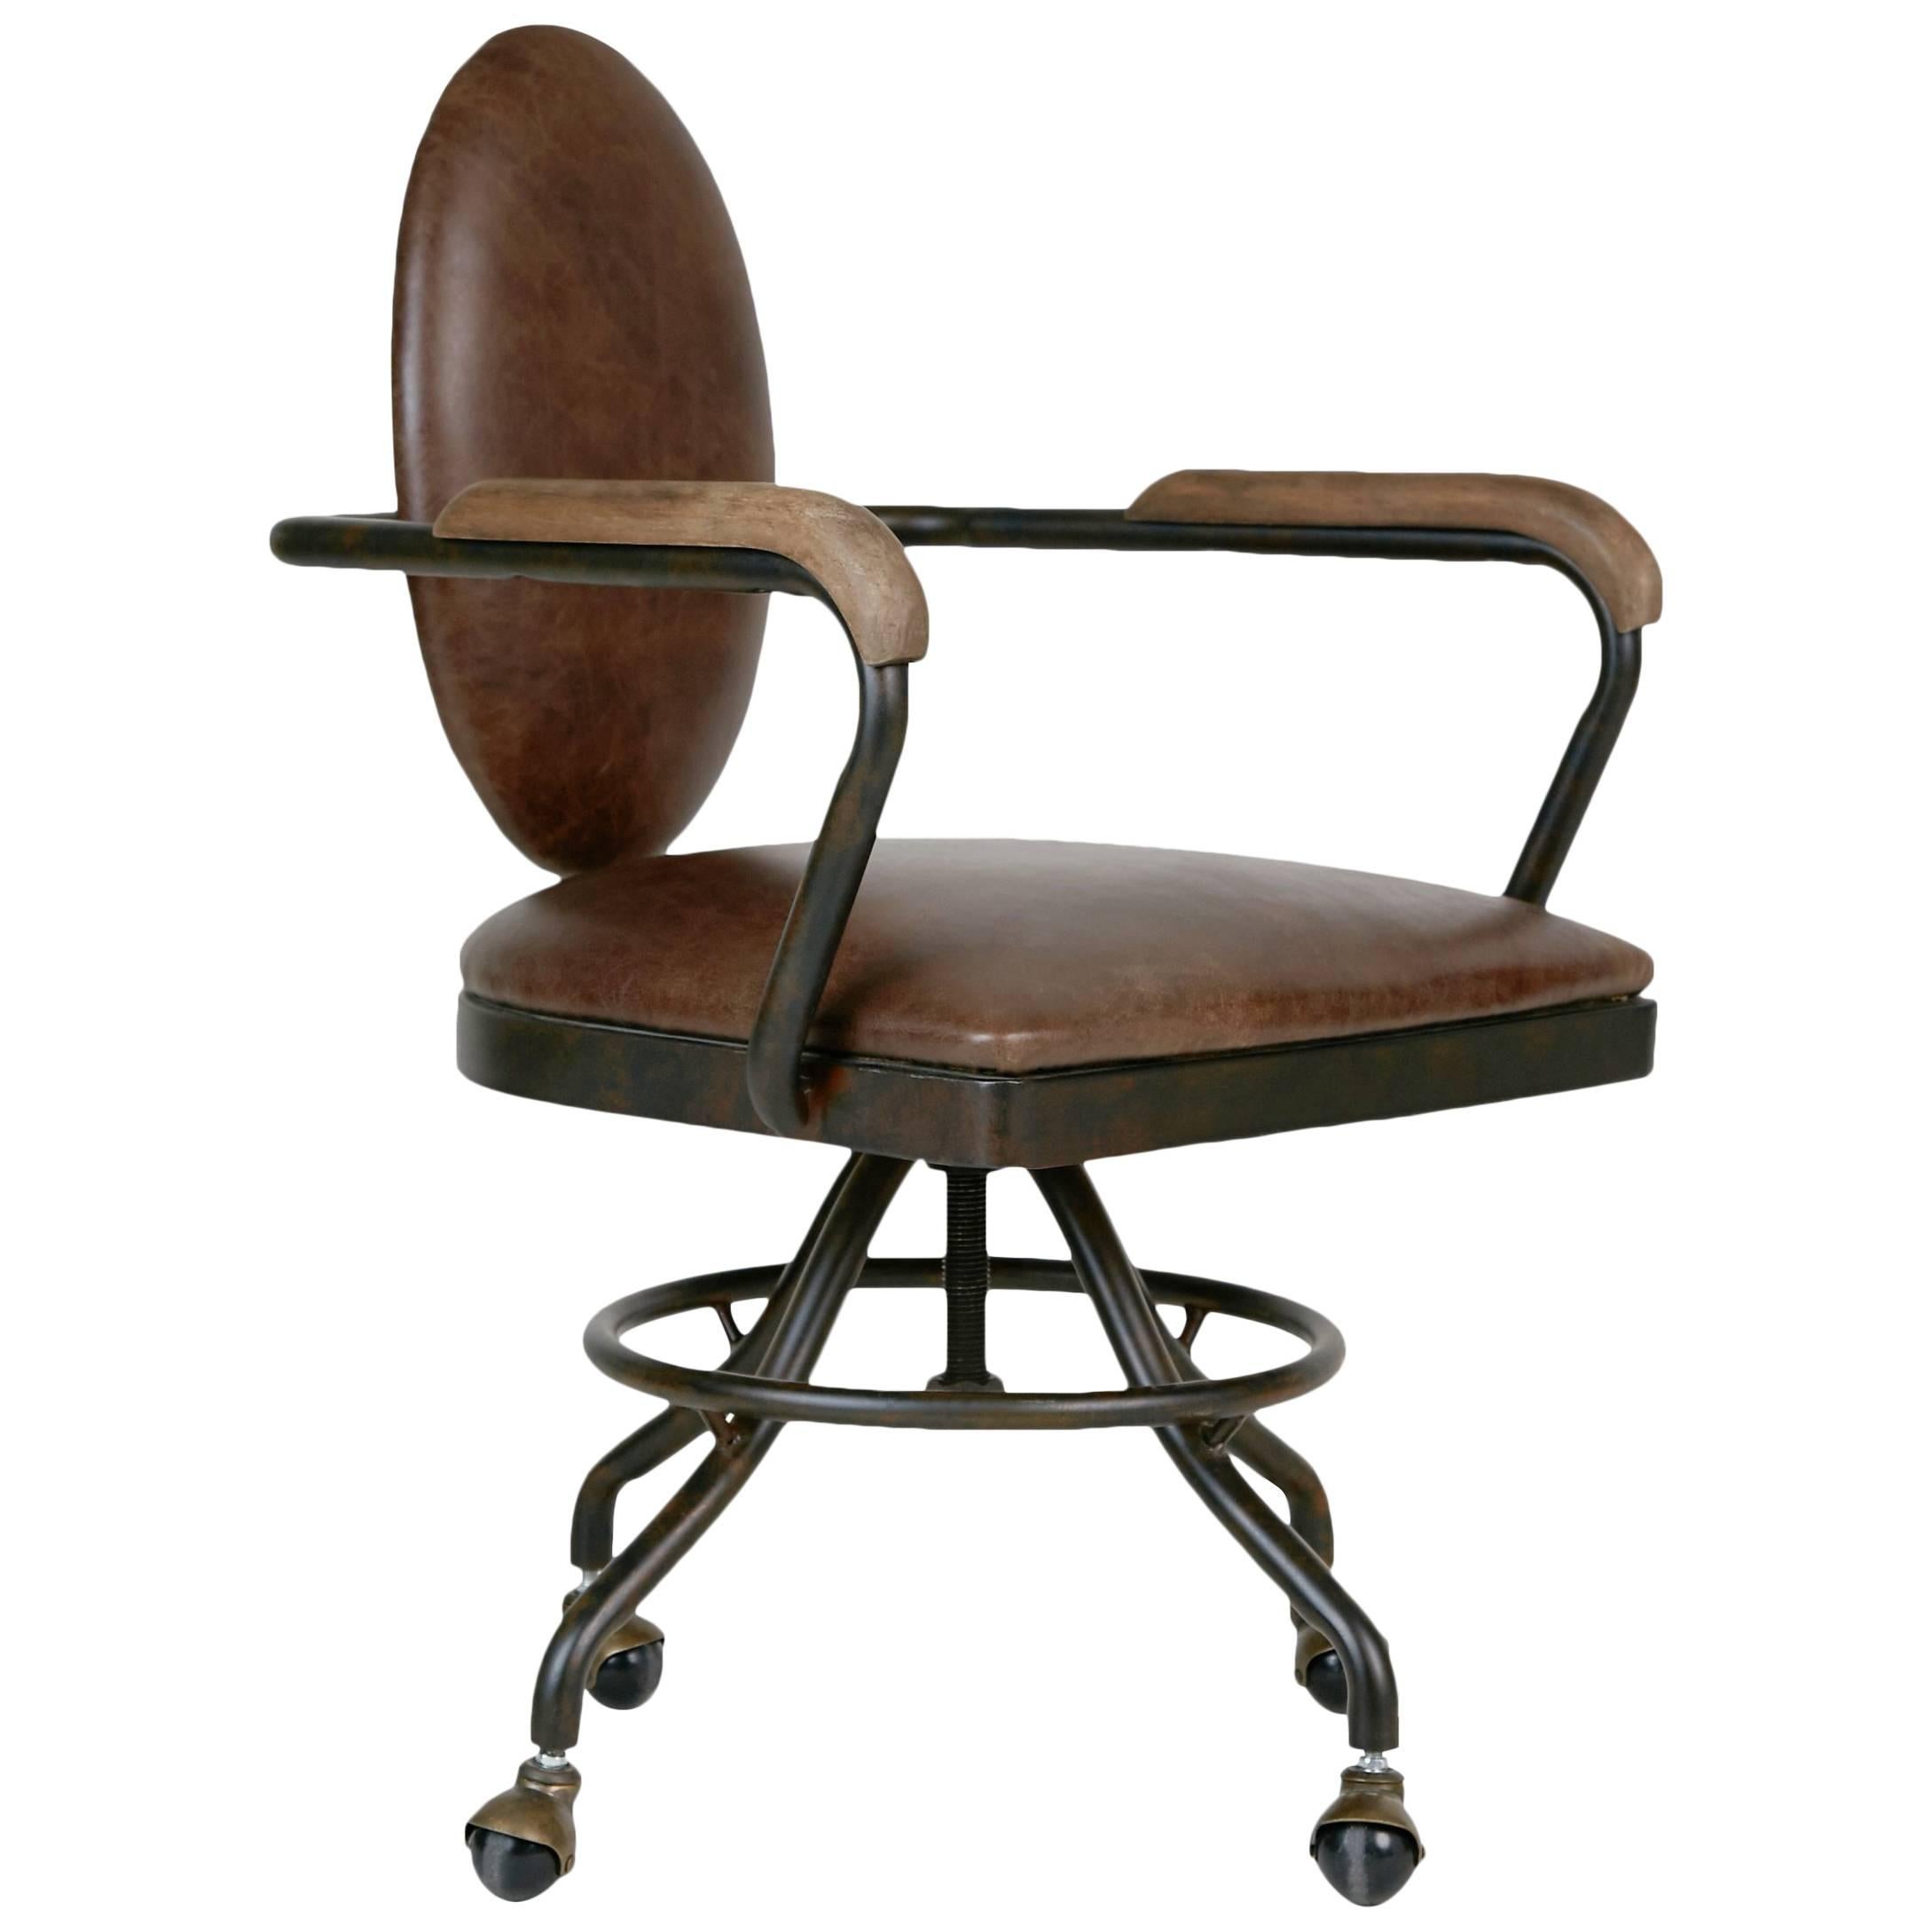 Industrial style desk chair, circa 1930. This sleekly designed office chair features an unusual oval shaped back with contrast nailheads on the reverse. The frame has an antiqued metal finish with smooth wooden armrests and is positioned on casters